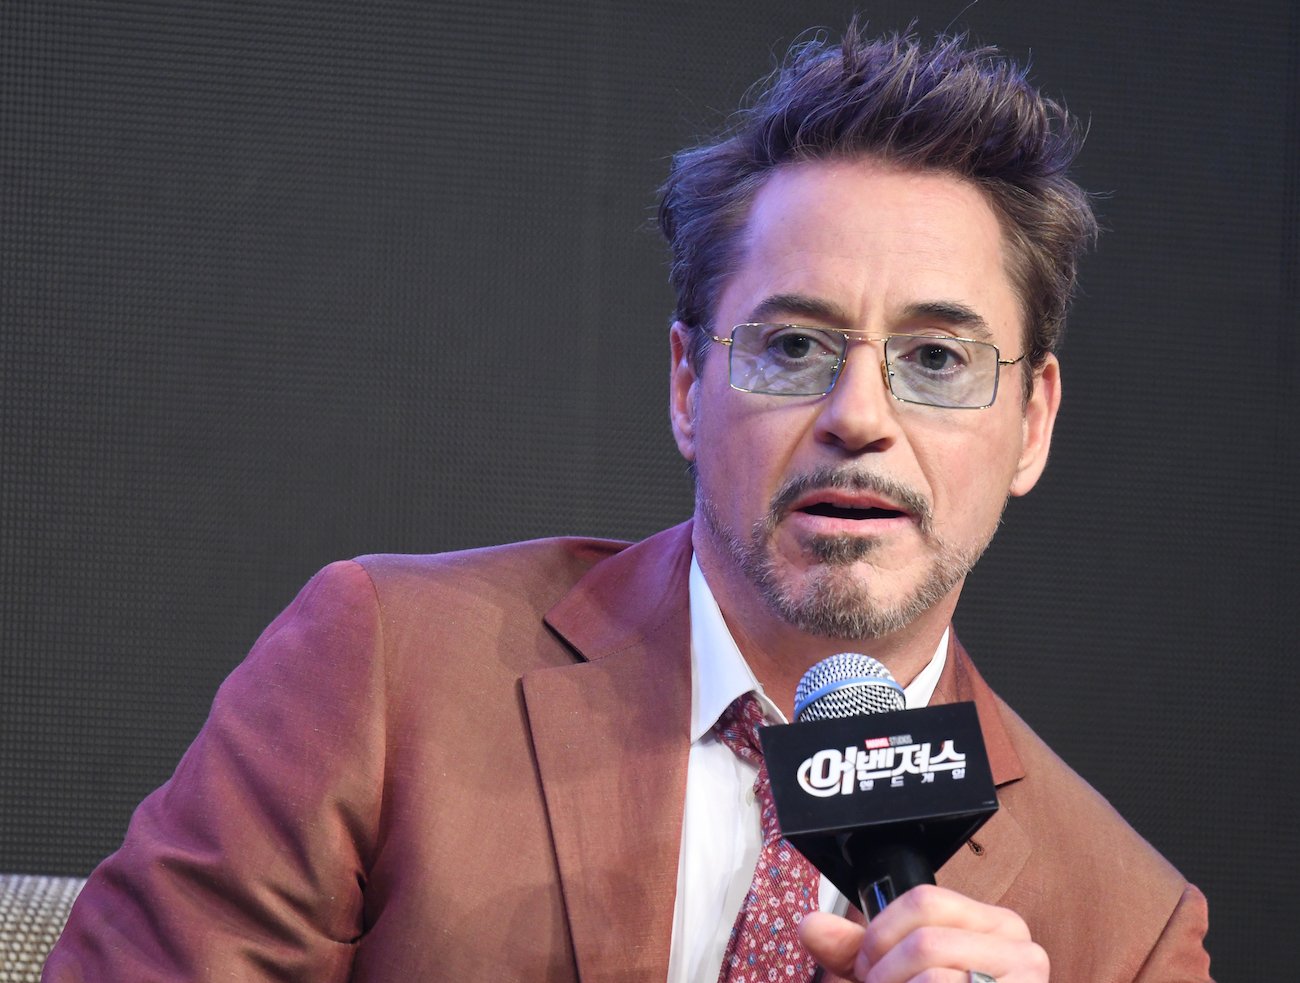 Robert Downey Jr. during a press conference for the movie 'Avengers: End Game'